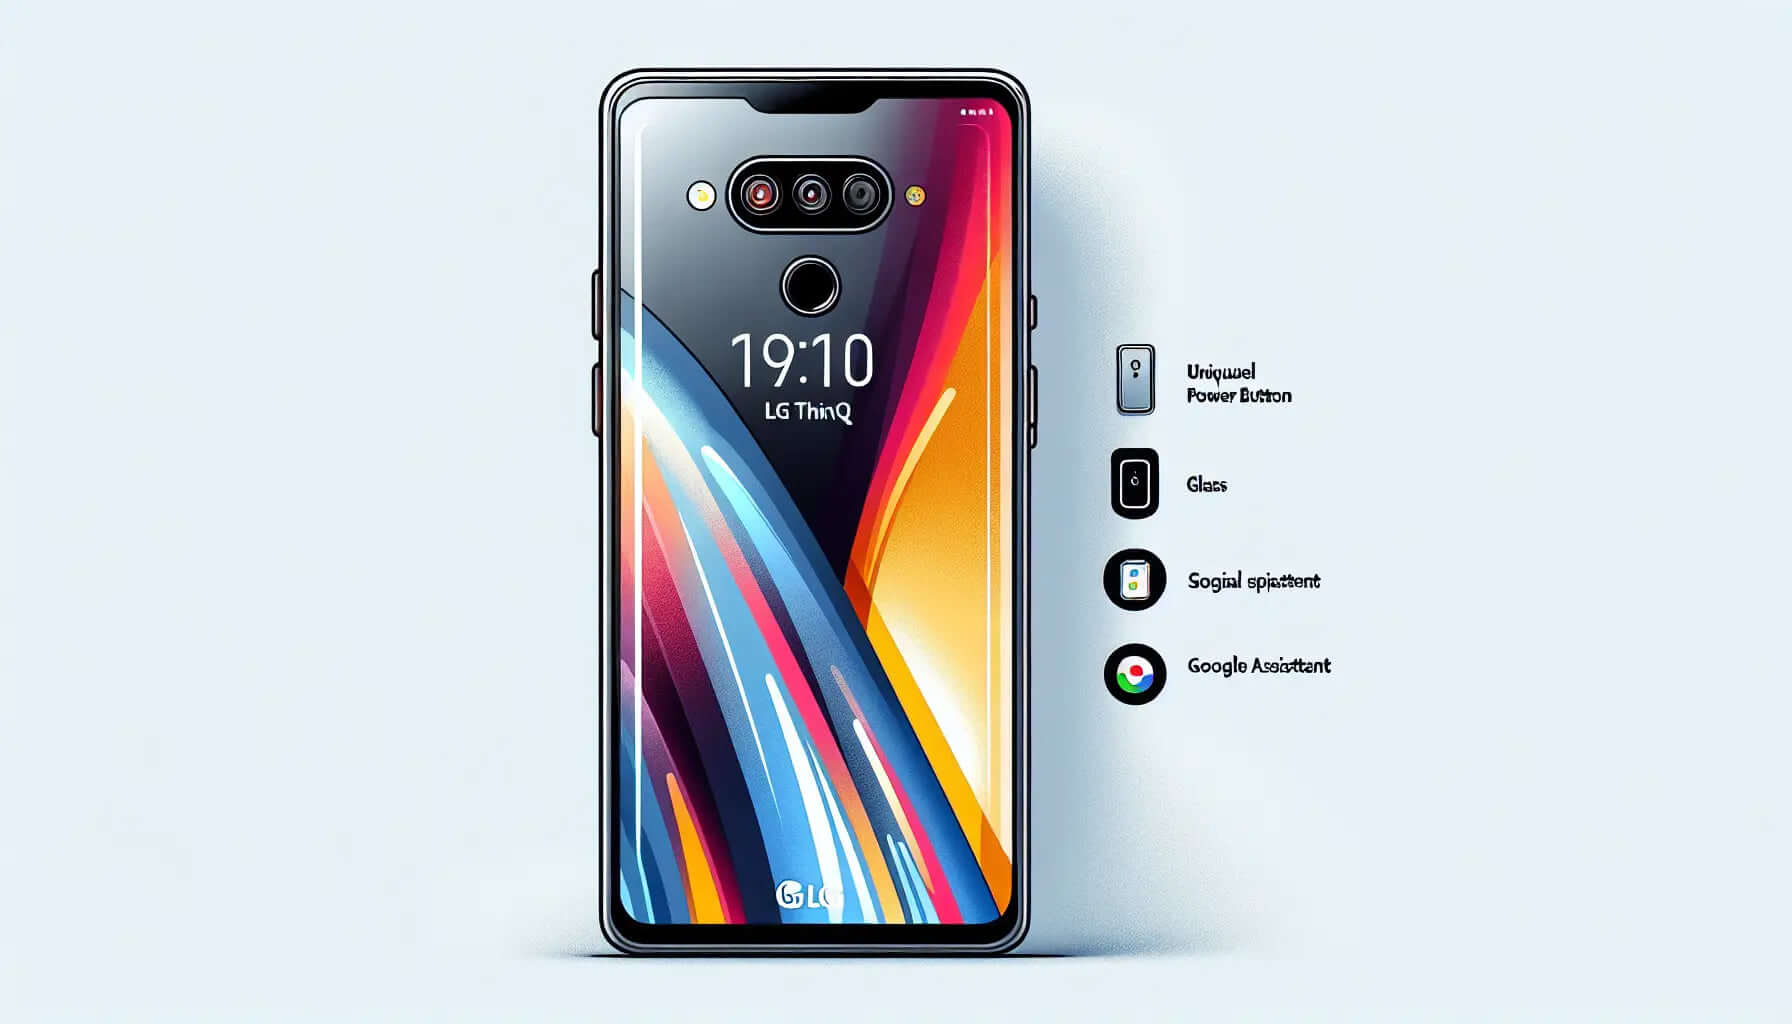 LG G7 ThinQ: A First Look at the Affordable Price and Impressive Features